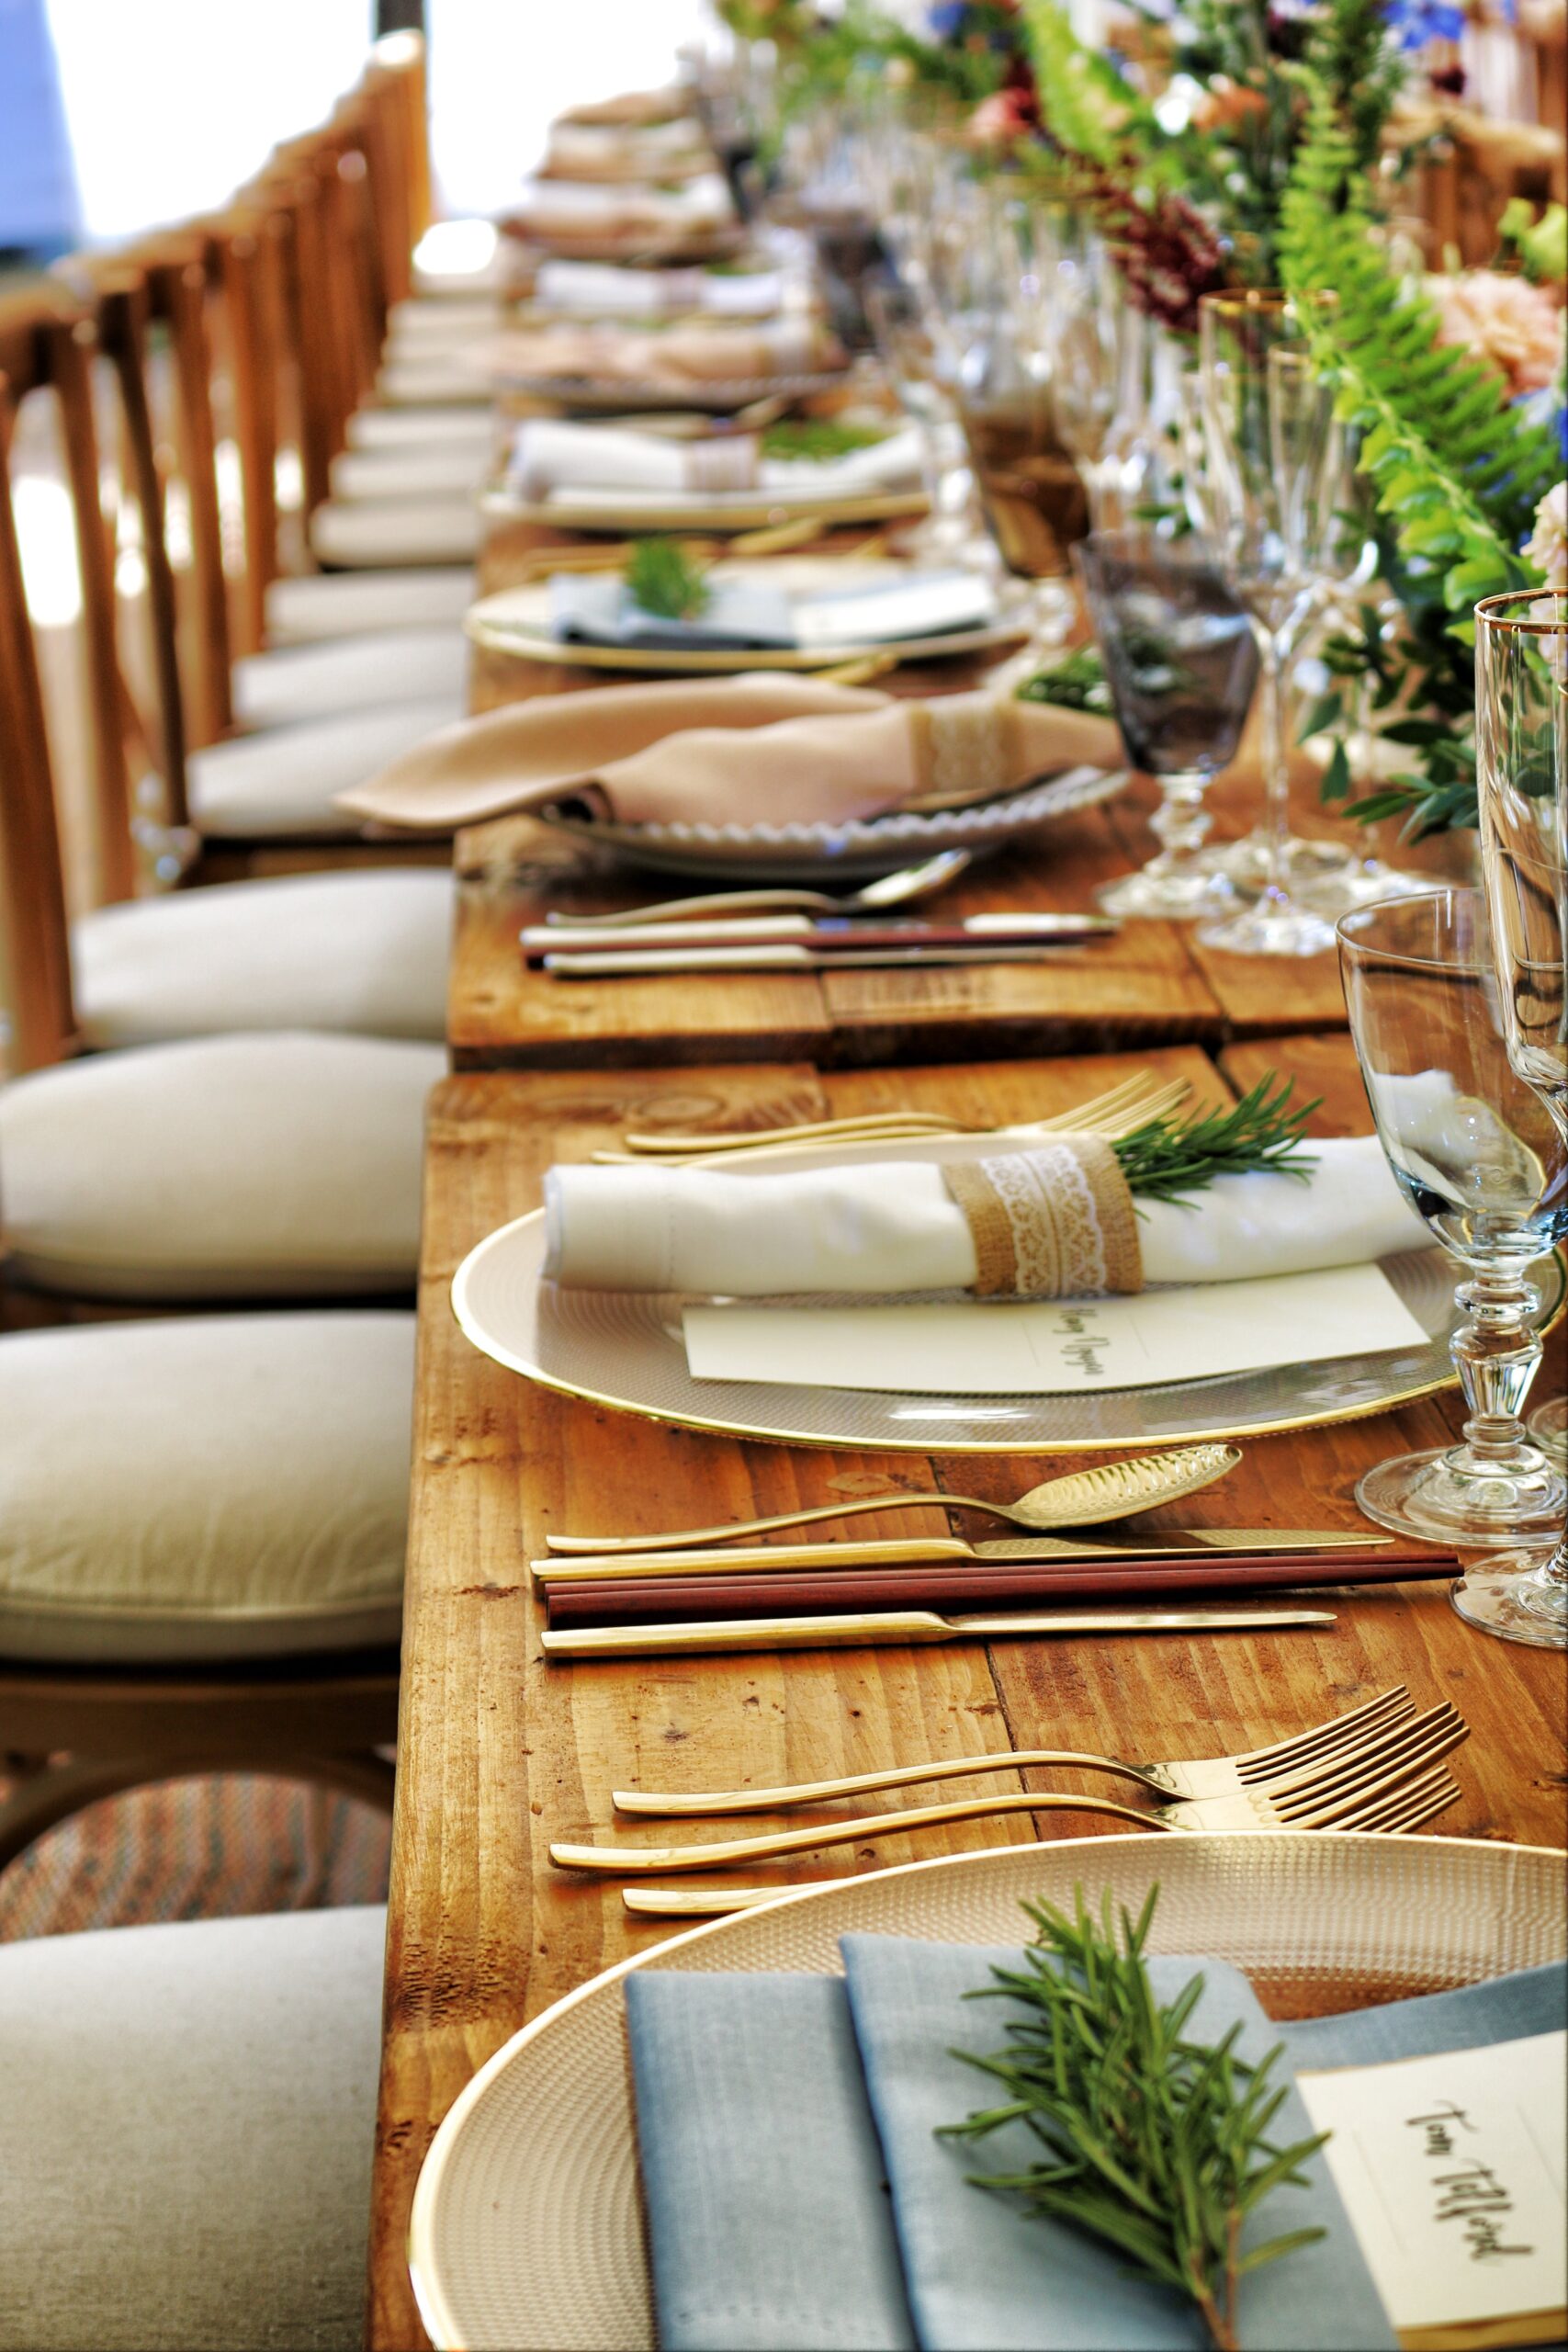 4 Ideas for a Perfect Tablescape This Holiday Season